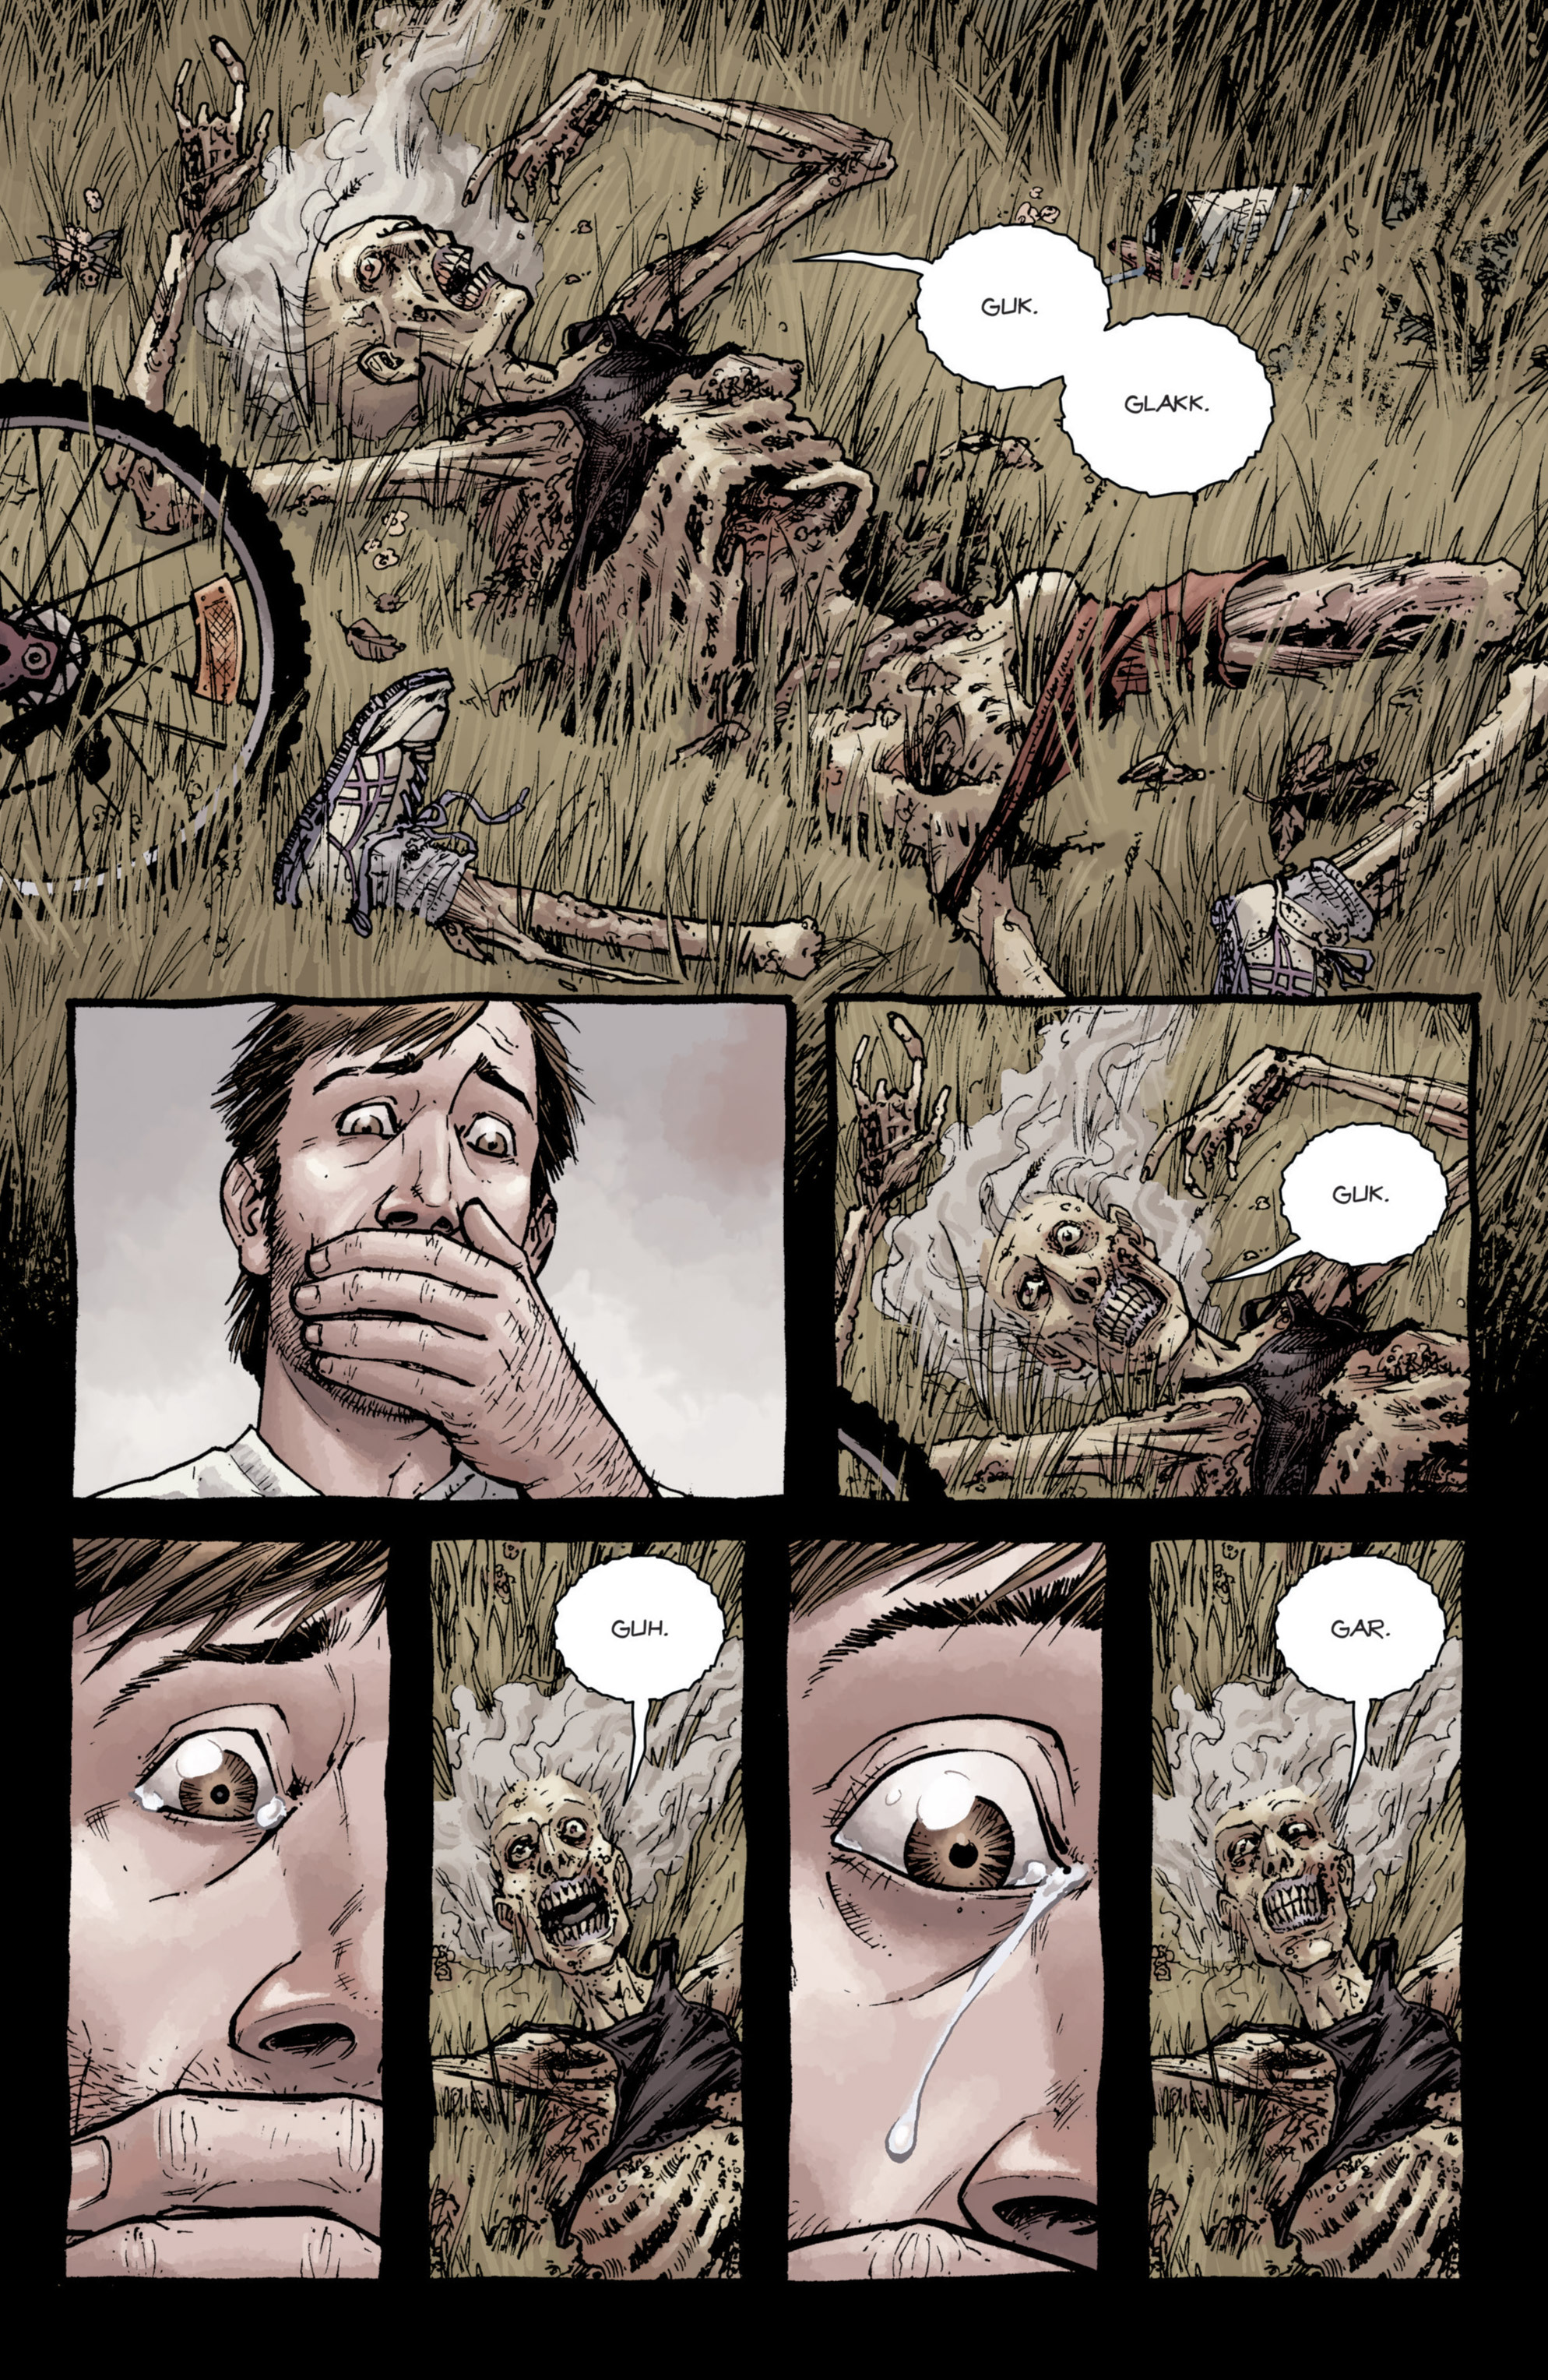 Read online The Walking Dead comic -  Issue # _Special - 1 - 10th Anniversary Edition - 12